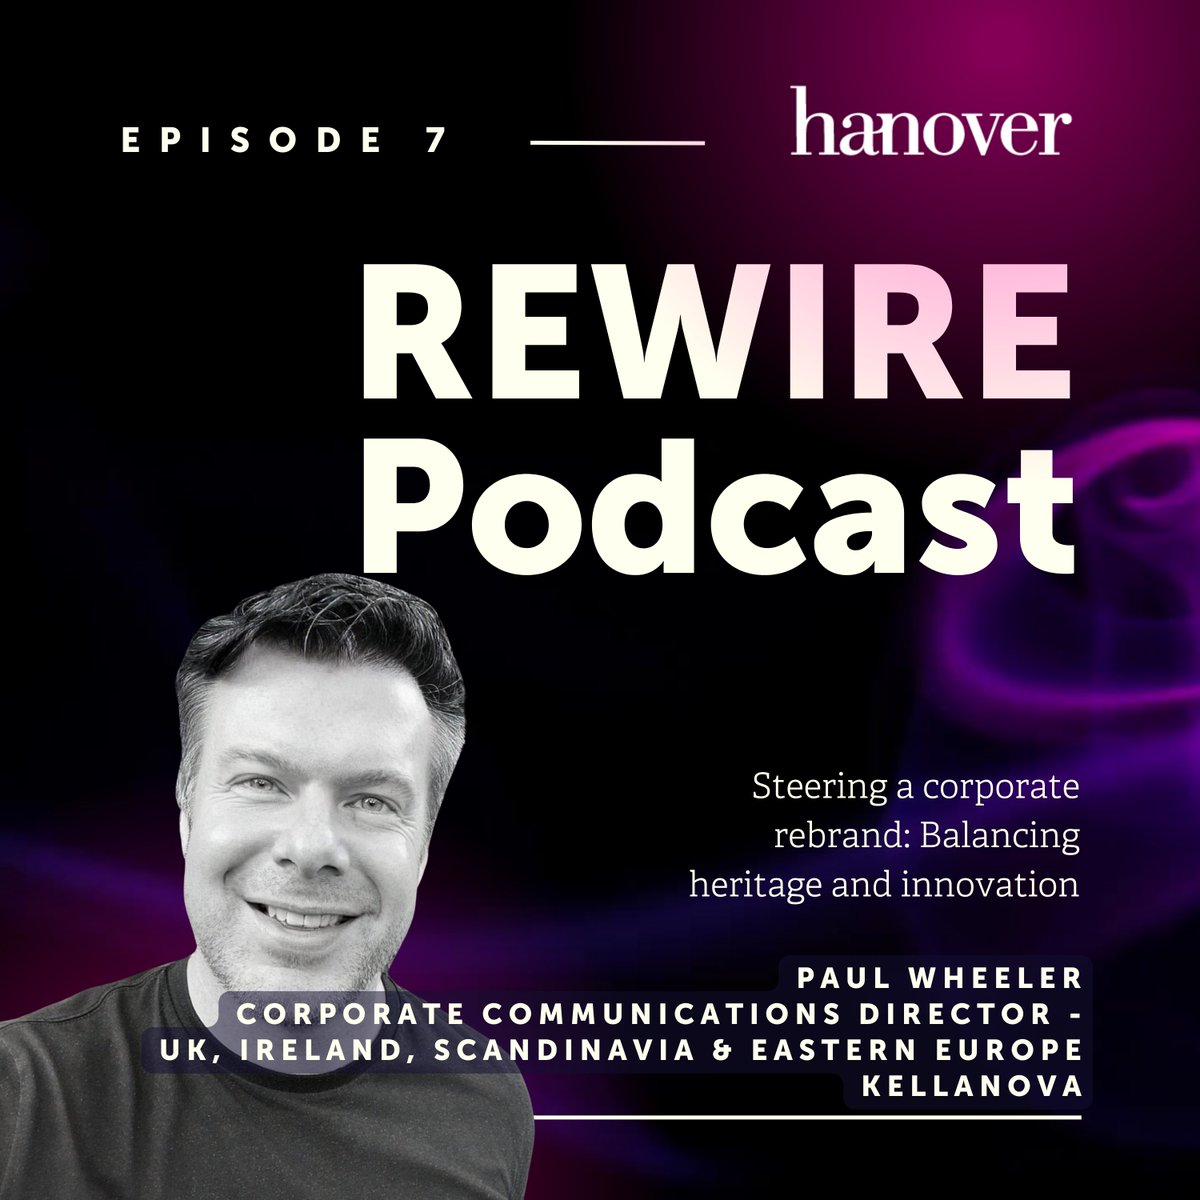 Our latest REWIRE episode with Paul Wheeler, Corporate Comms Director for the UK, Ireland, Scandinavia & Eastern Europe at Kellanova is now live. Hear how the 18-month old Kellanova is navigating its legacy while carving out a new story in the industry: ow.ly/CFgW50RkThv